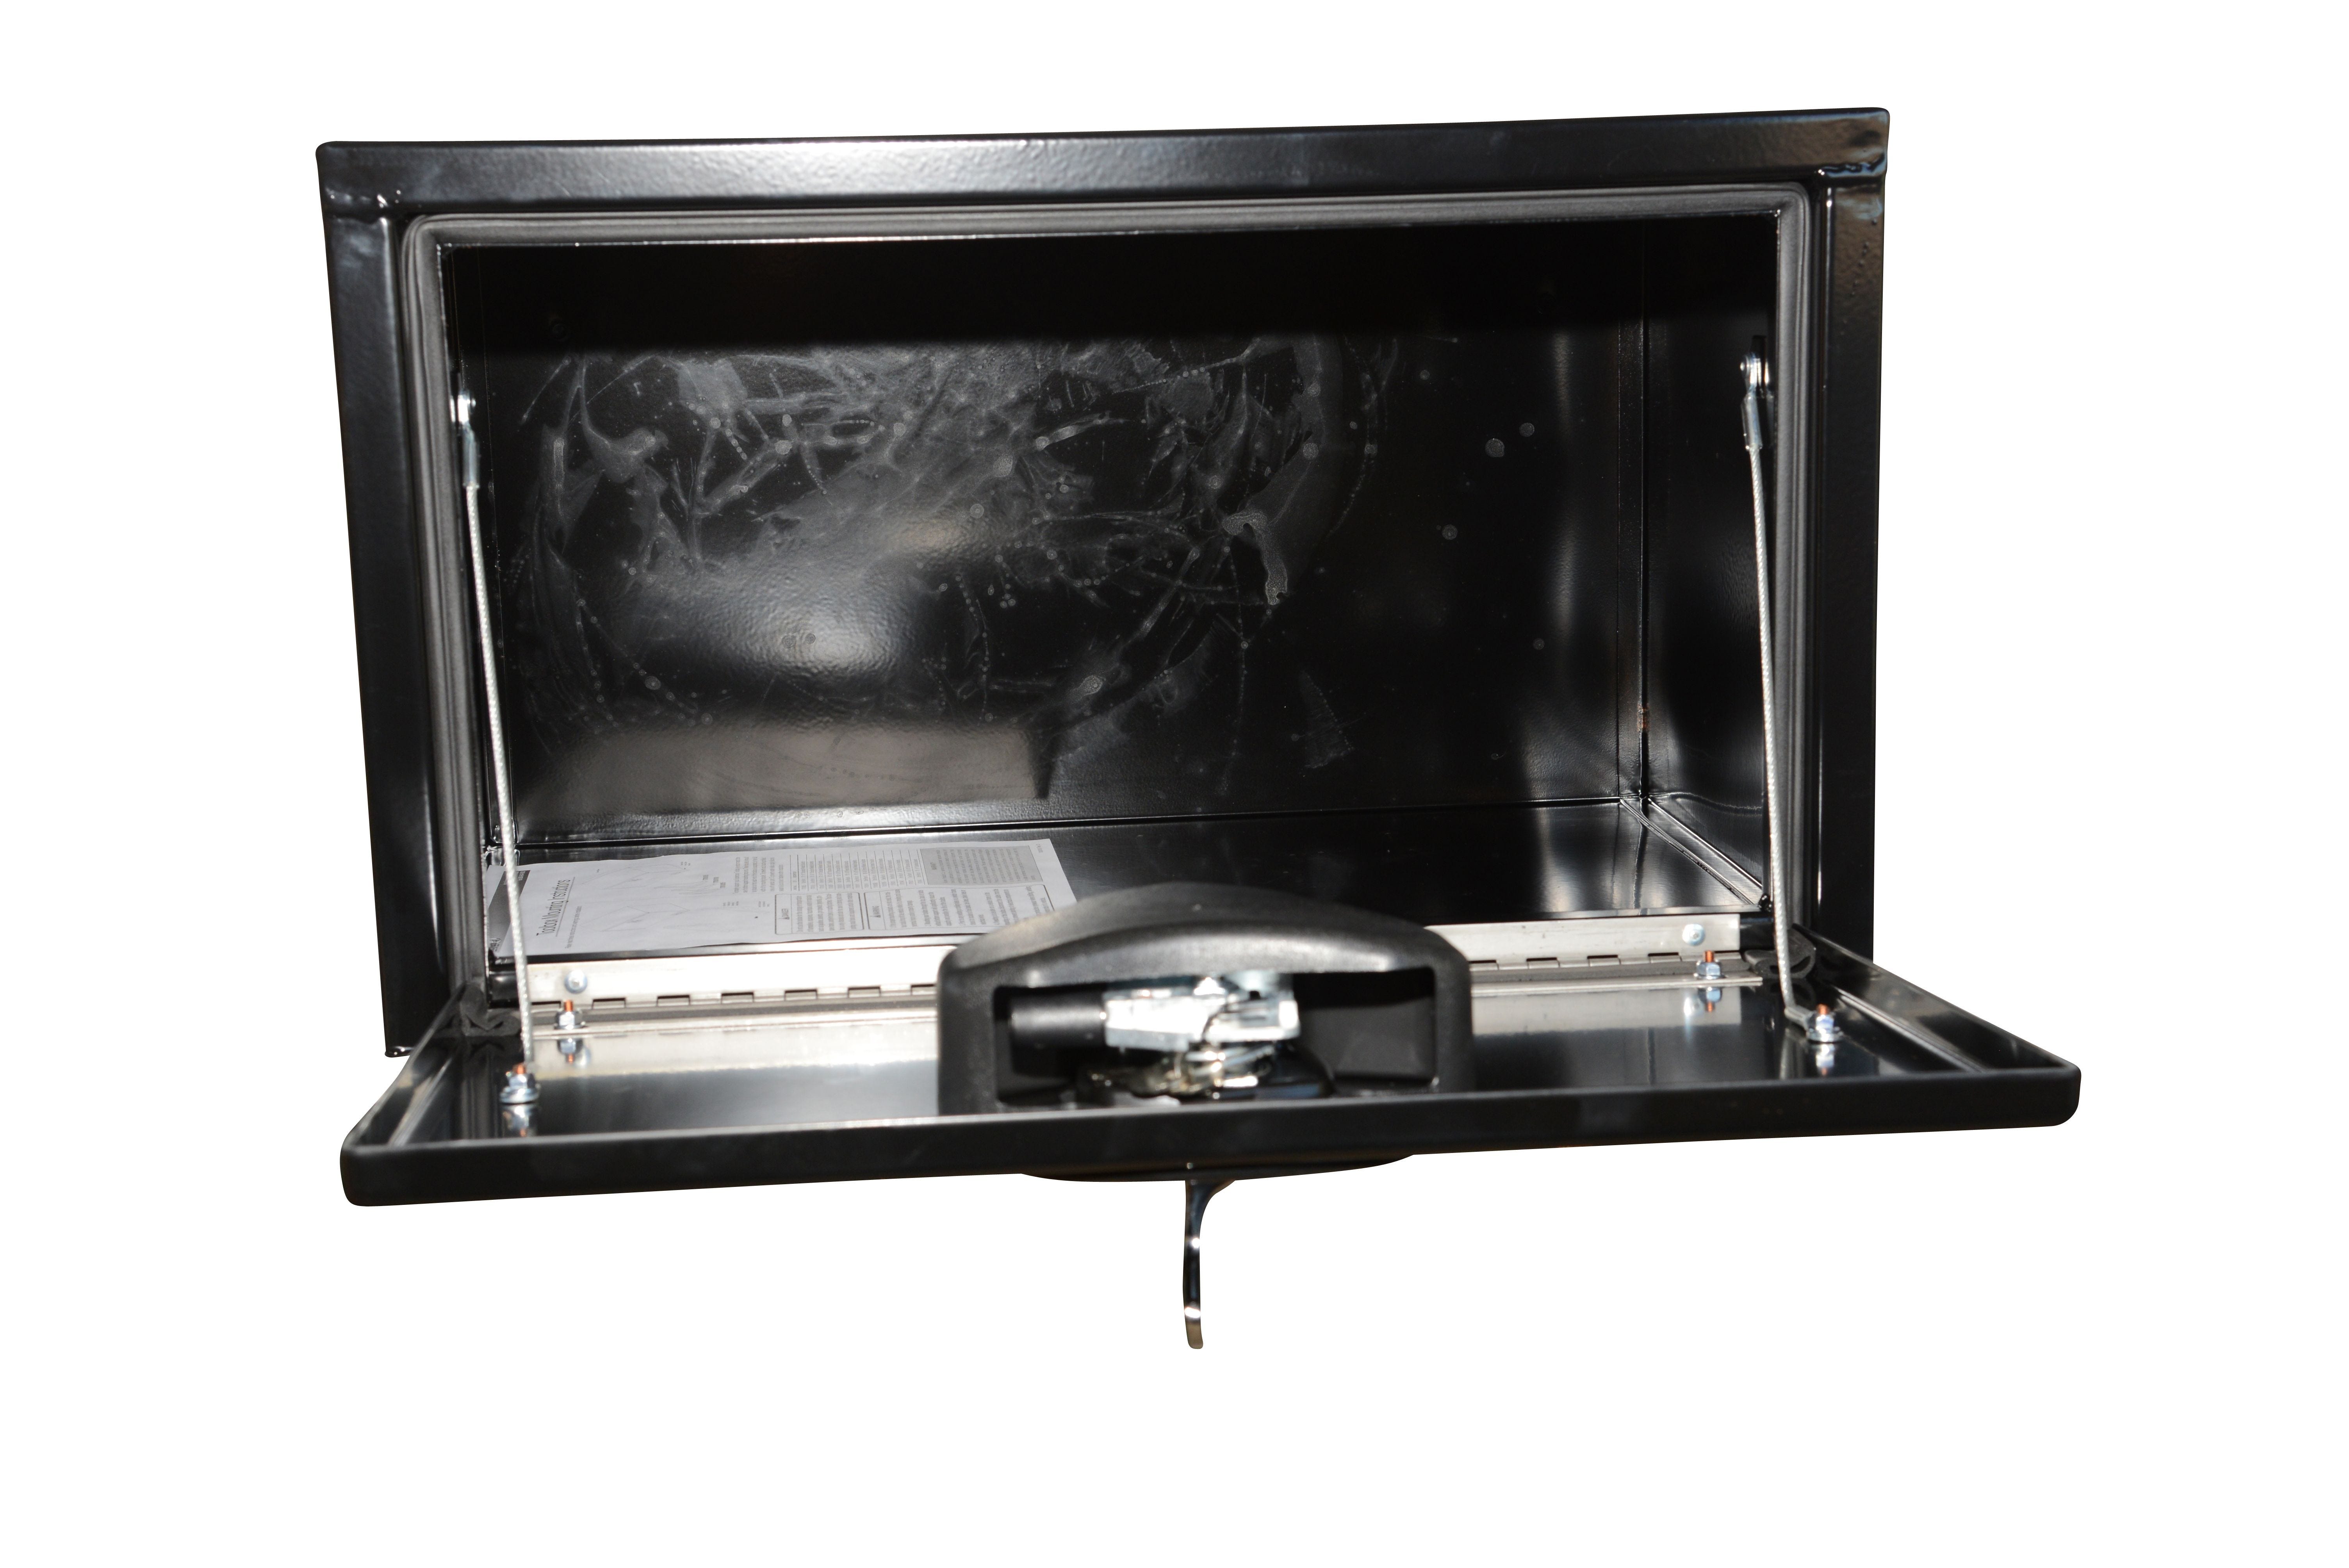 Buyers 1713300 Powder Coated Steel Underbody Tool Box - 14 Inches Tall x 16 Inches Deep x 24 Inches Long